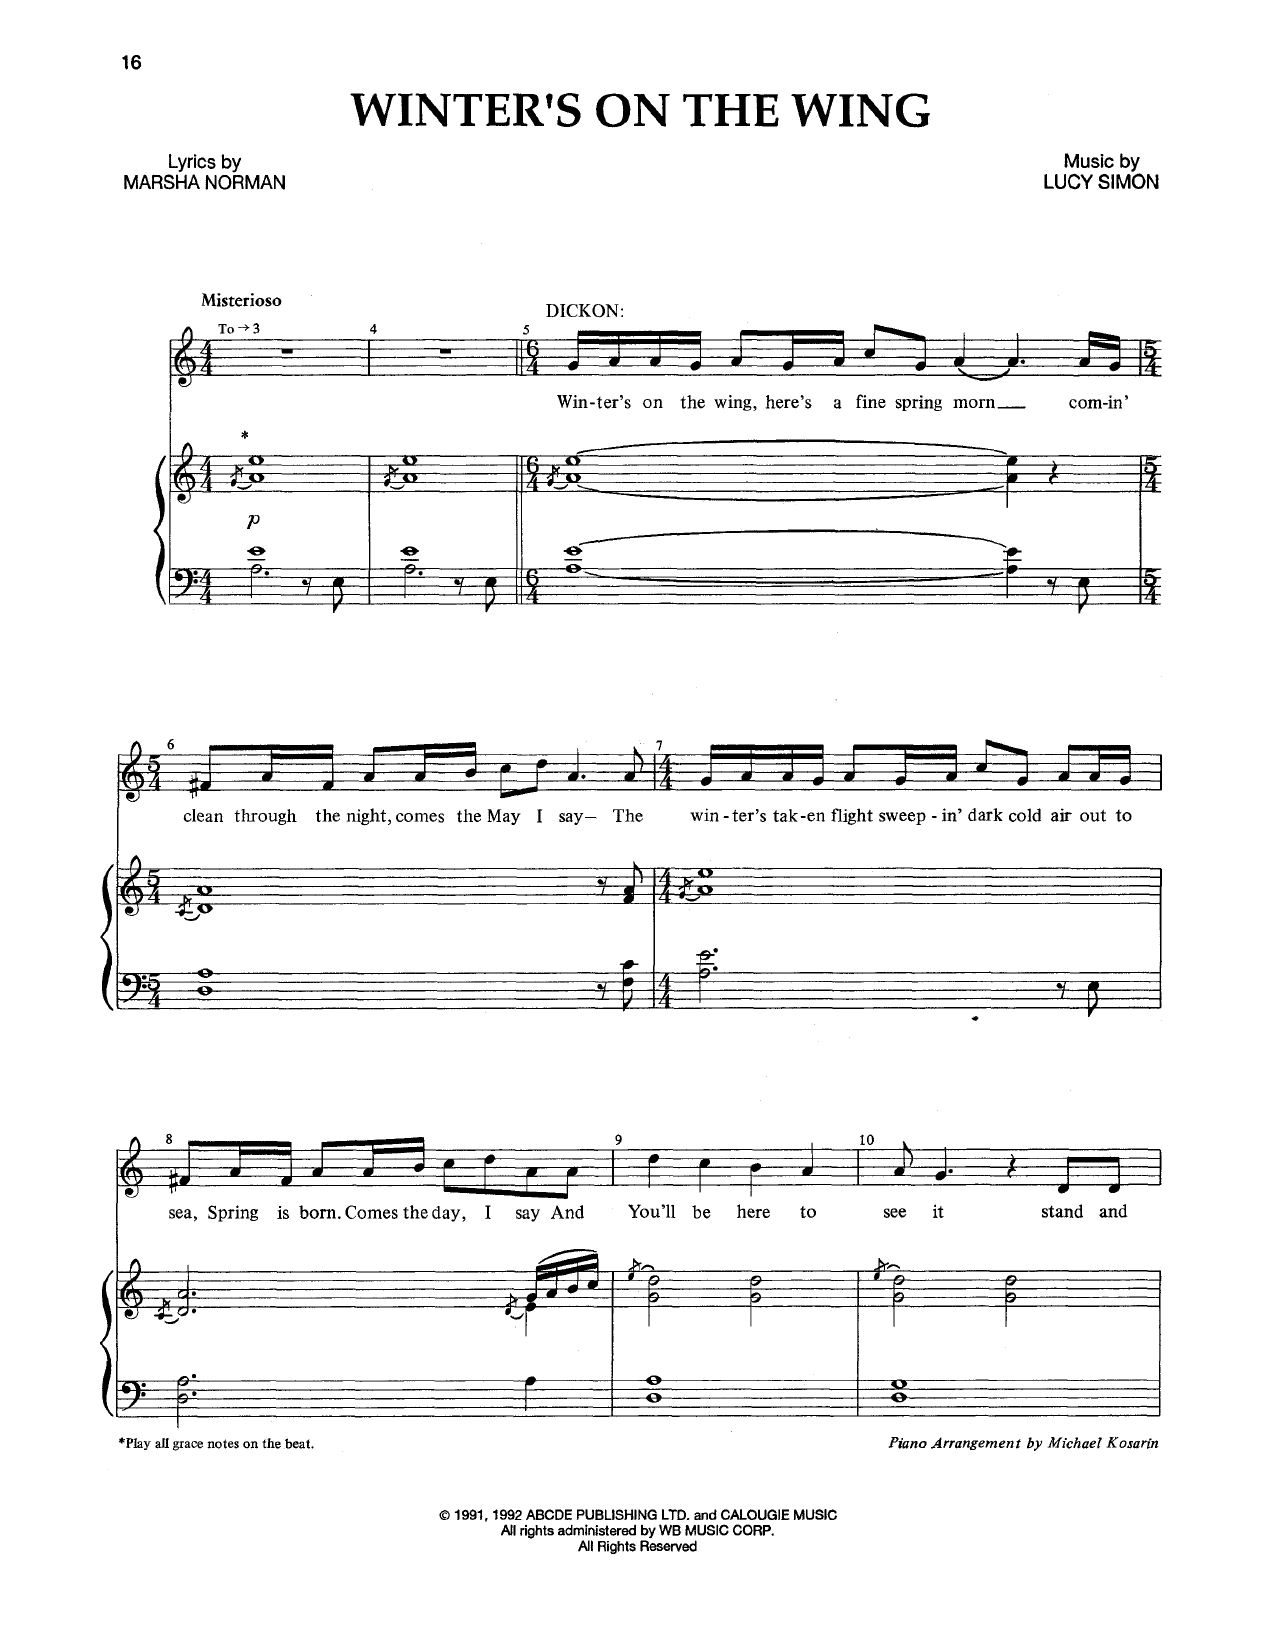 Download Marsha Norman & Lucy Simon Winter's On The Wing Sheet Music